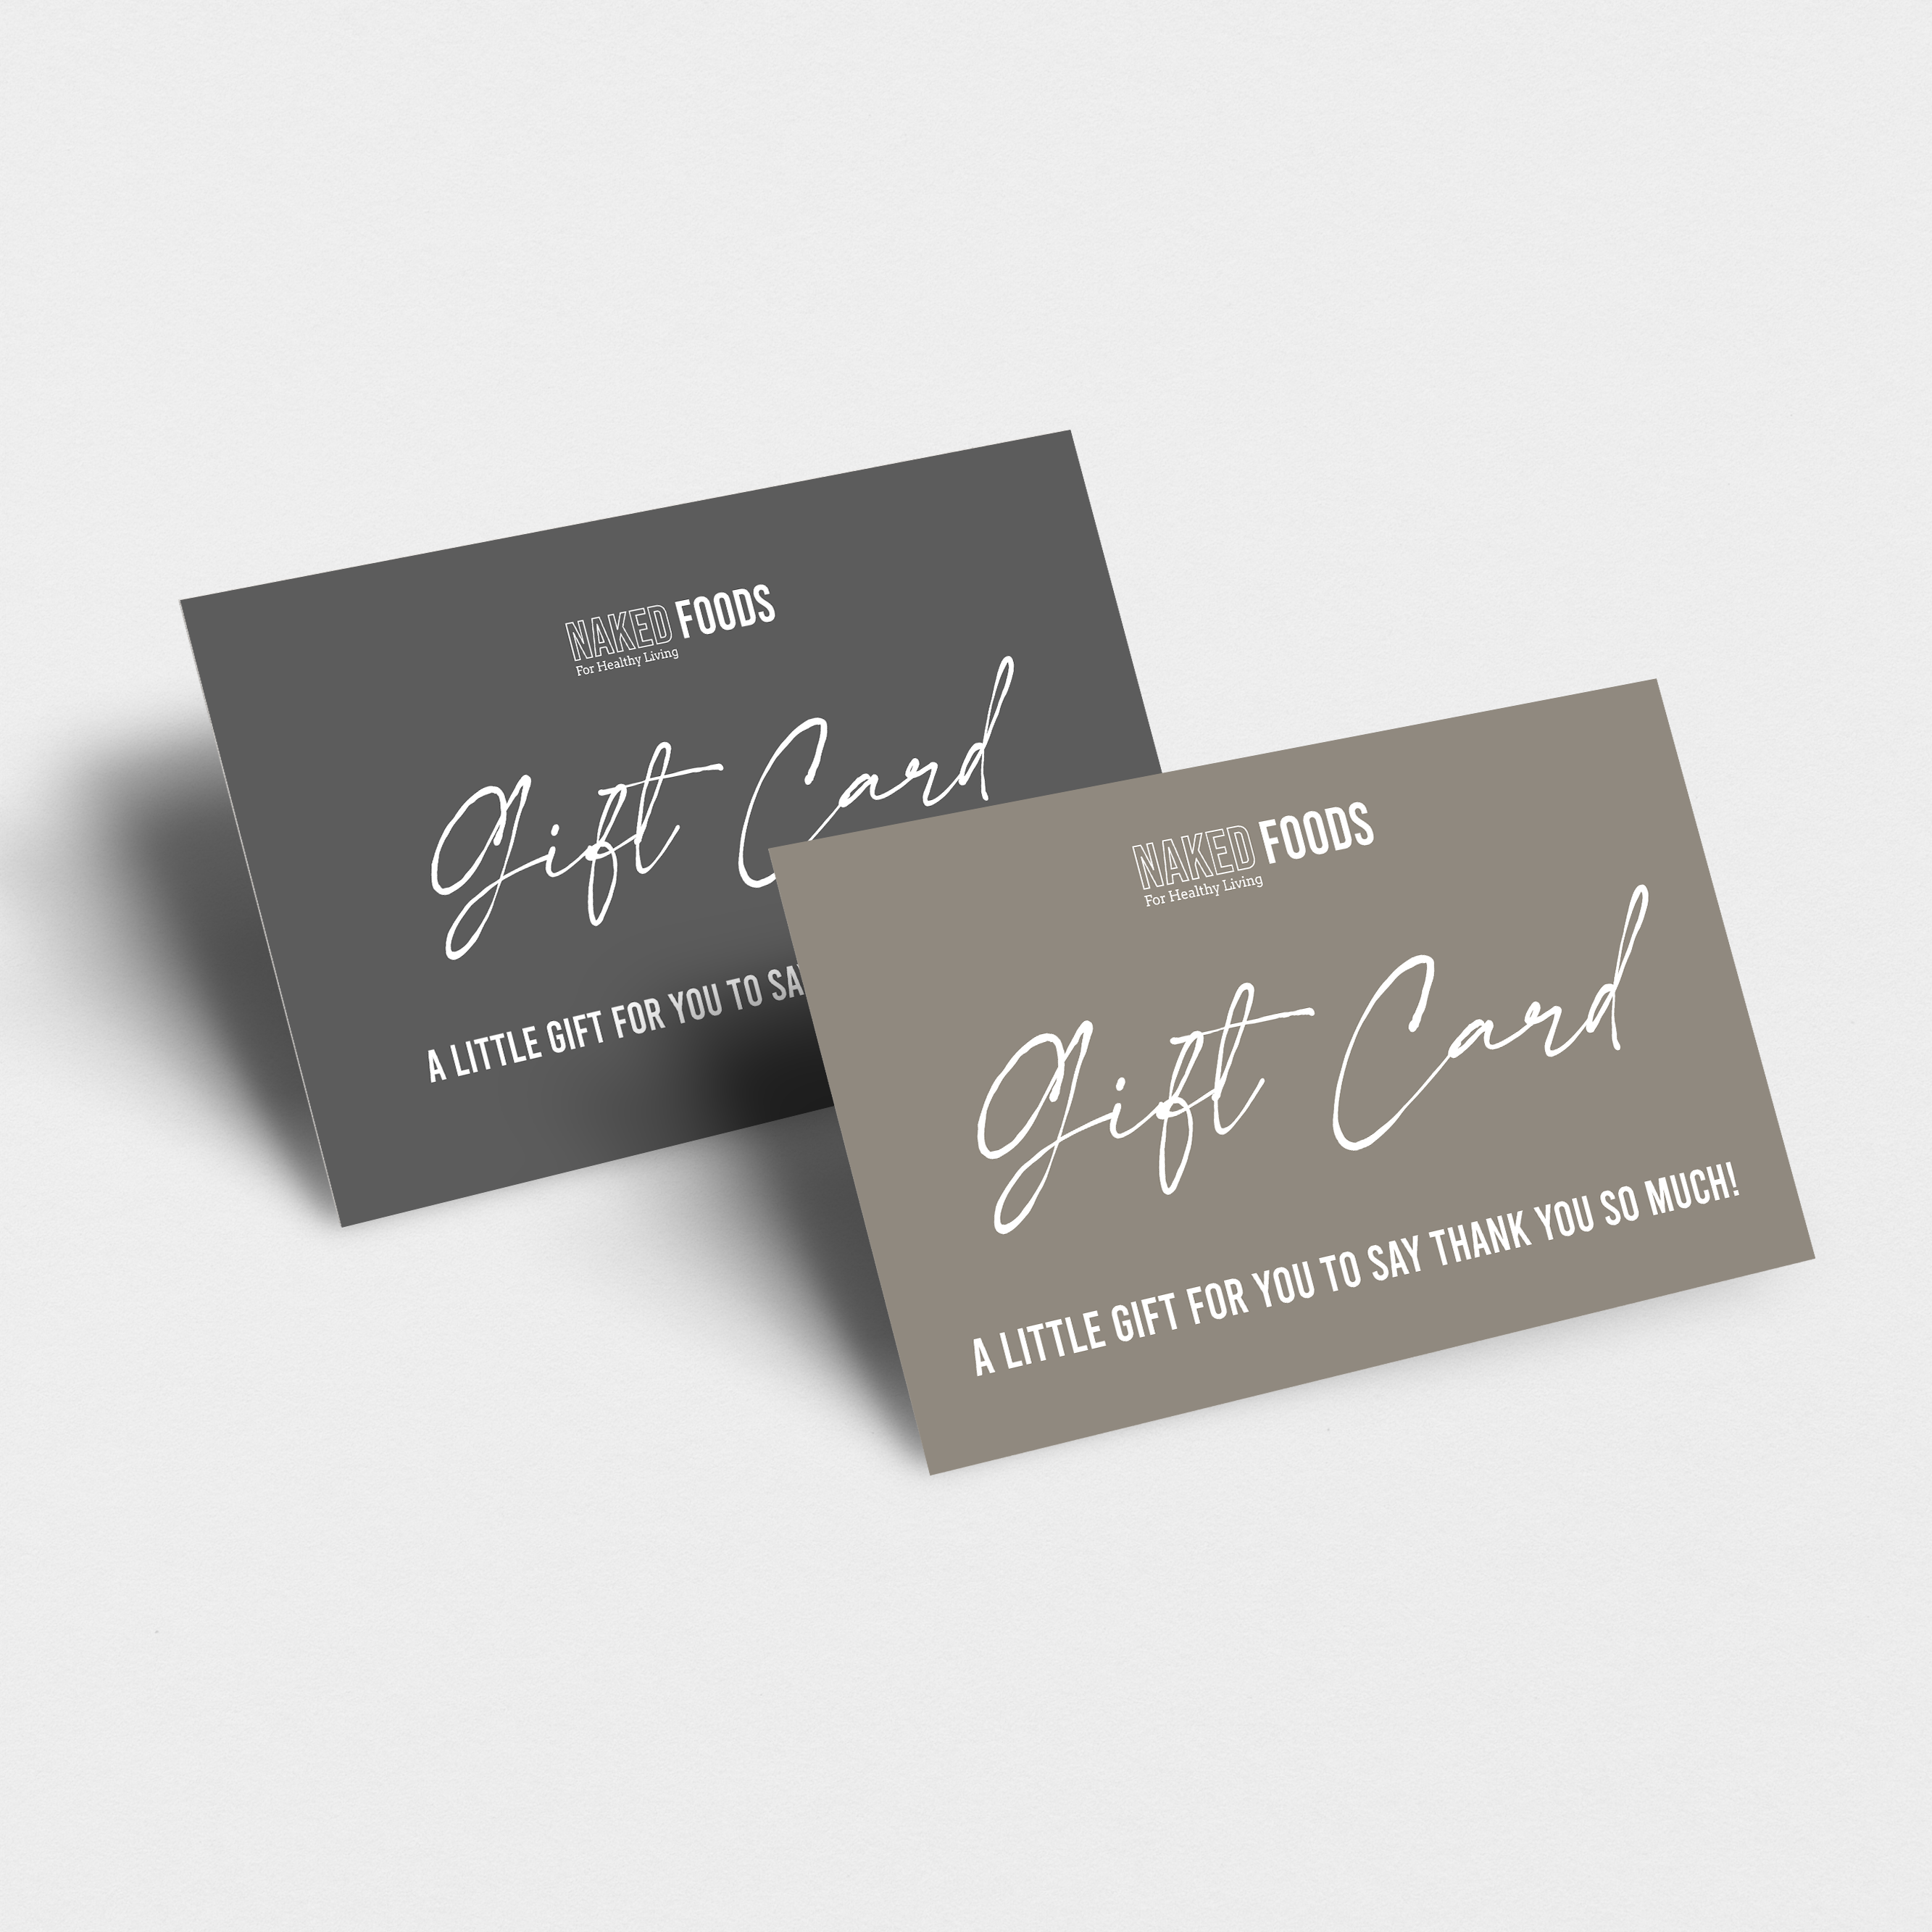 Naked Foods Gift Card